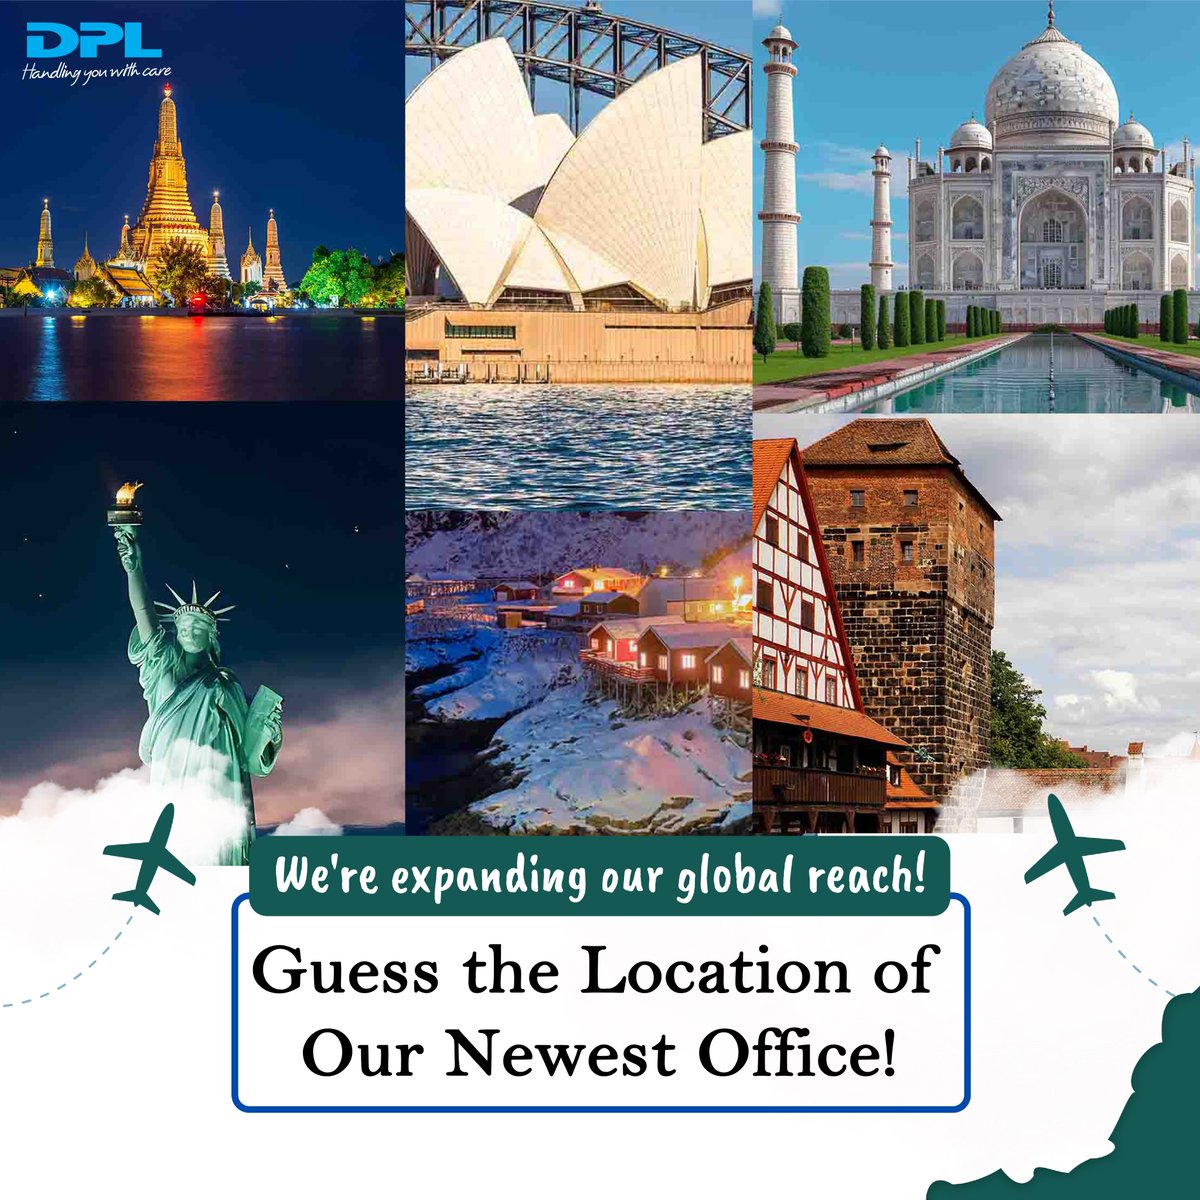 We're expanding our global reach!
Guess where DPL's next marketing arm will be opening its doors?

Hint: It's known for its rich history, delicious cuisine, and vibrant culture.

#DPLGlobal #NewMarket #Globalreach #handprotection